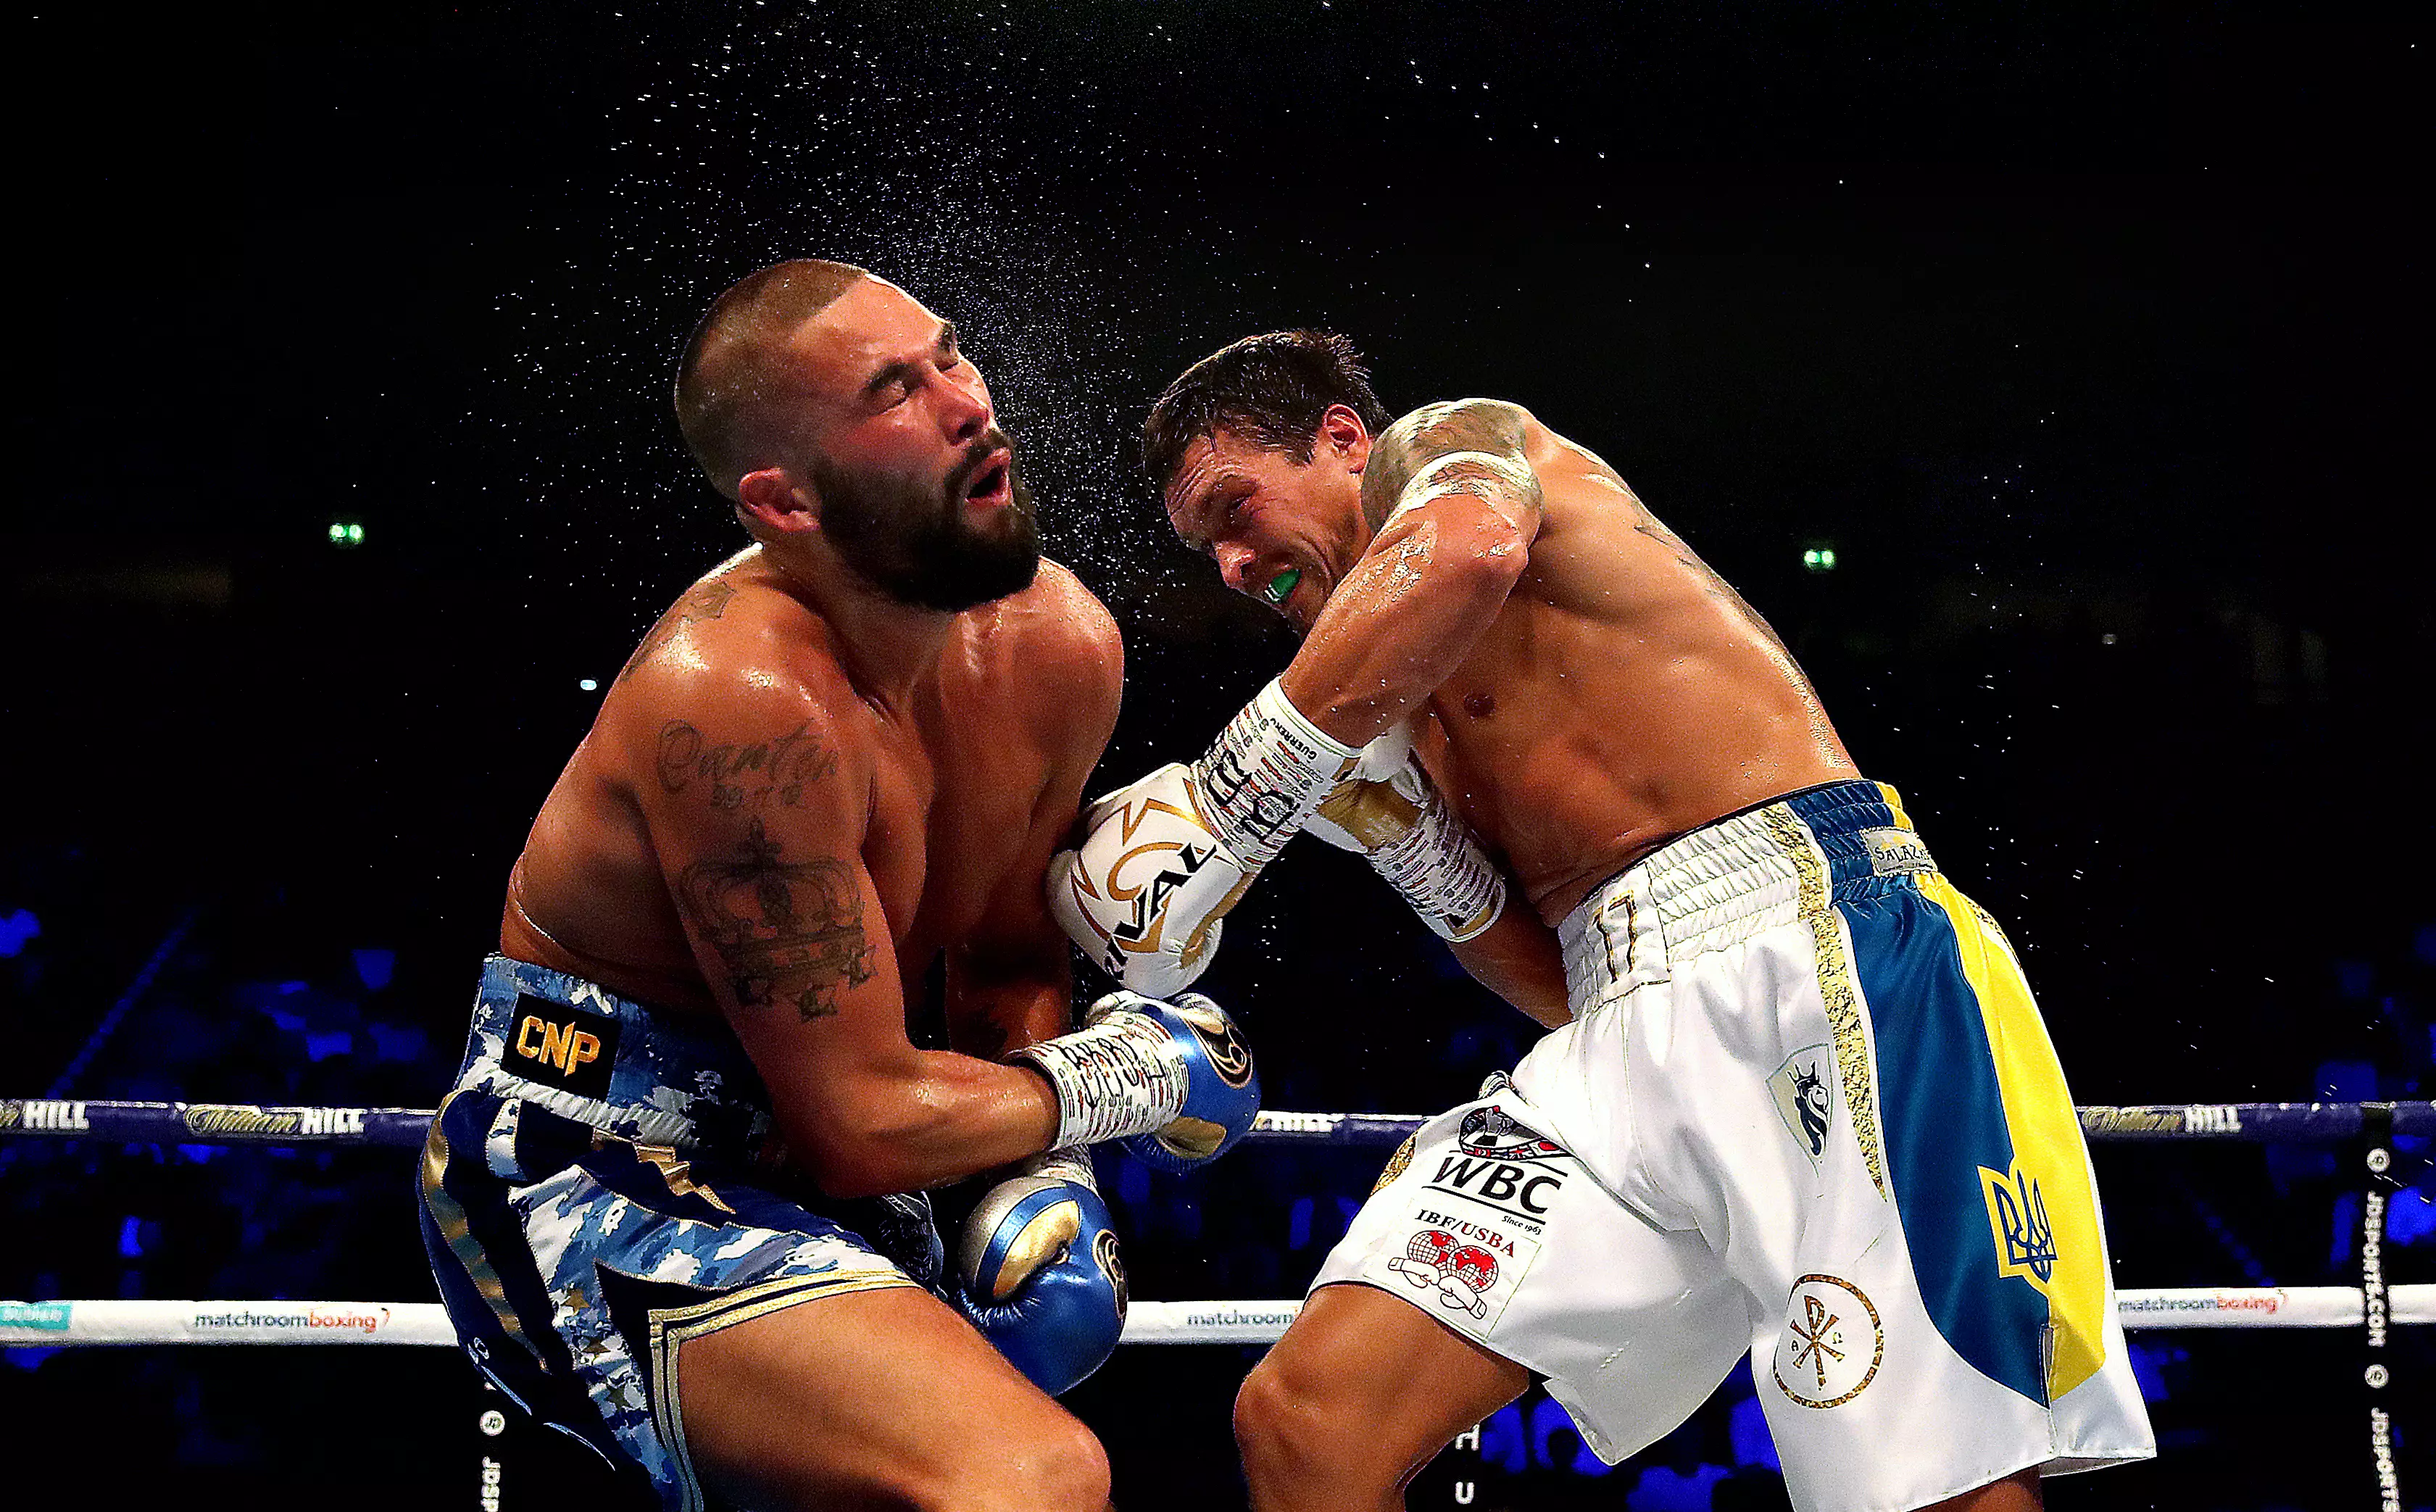 Olexandr Usyk, pictured knocking out Tony Bellew, dominated the cruiserweight division